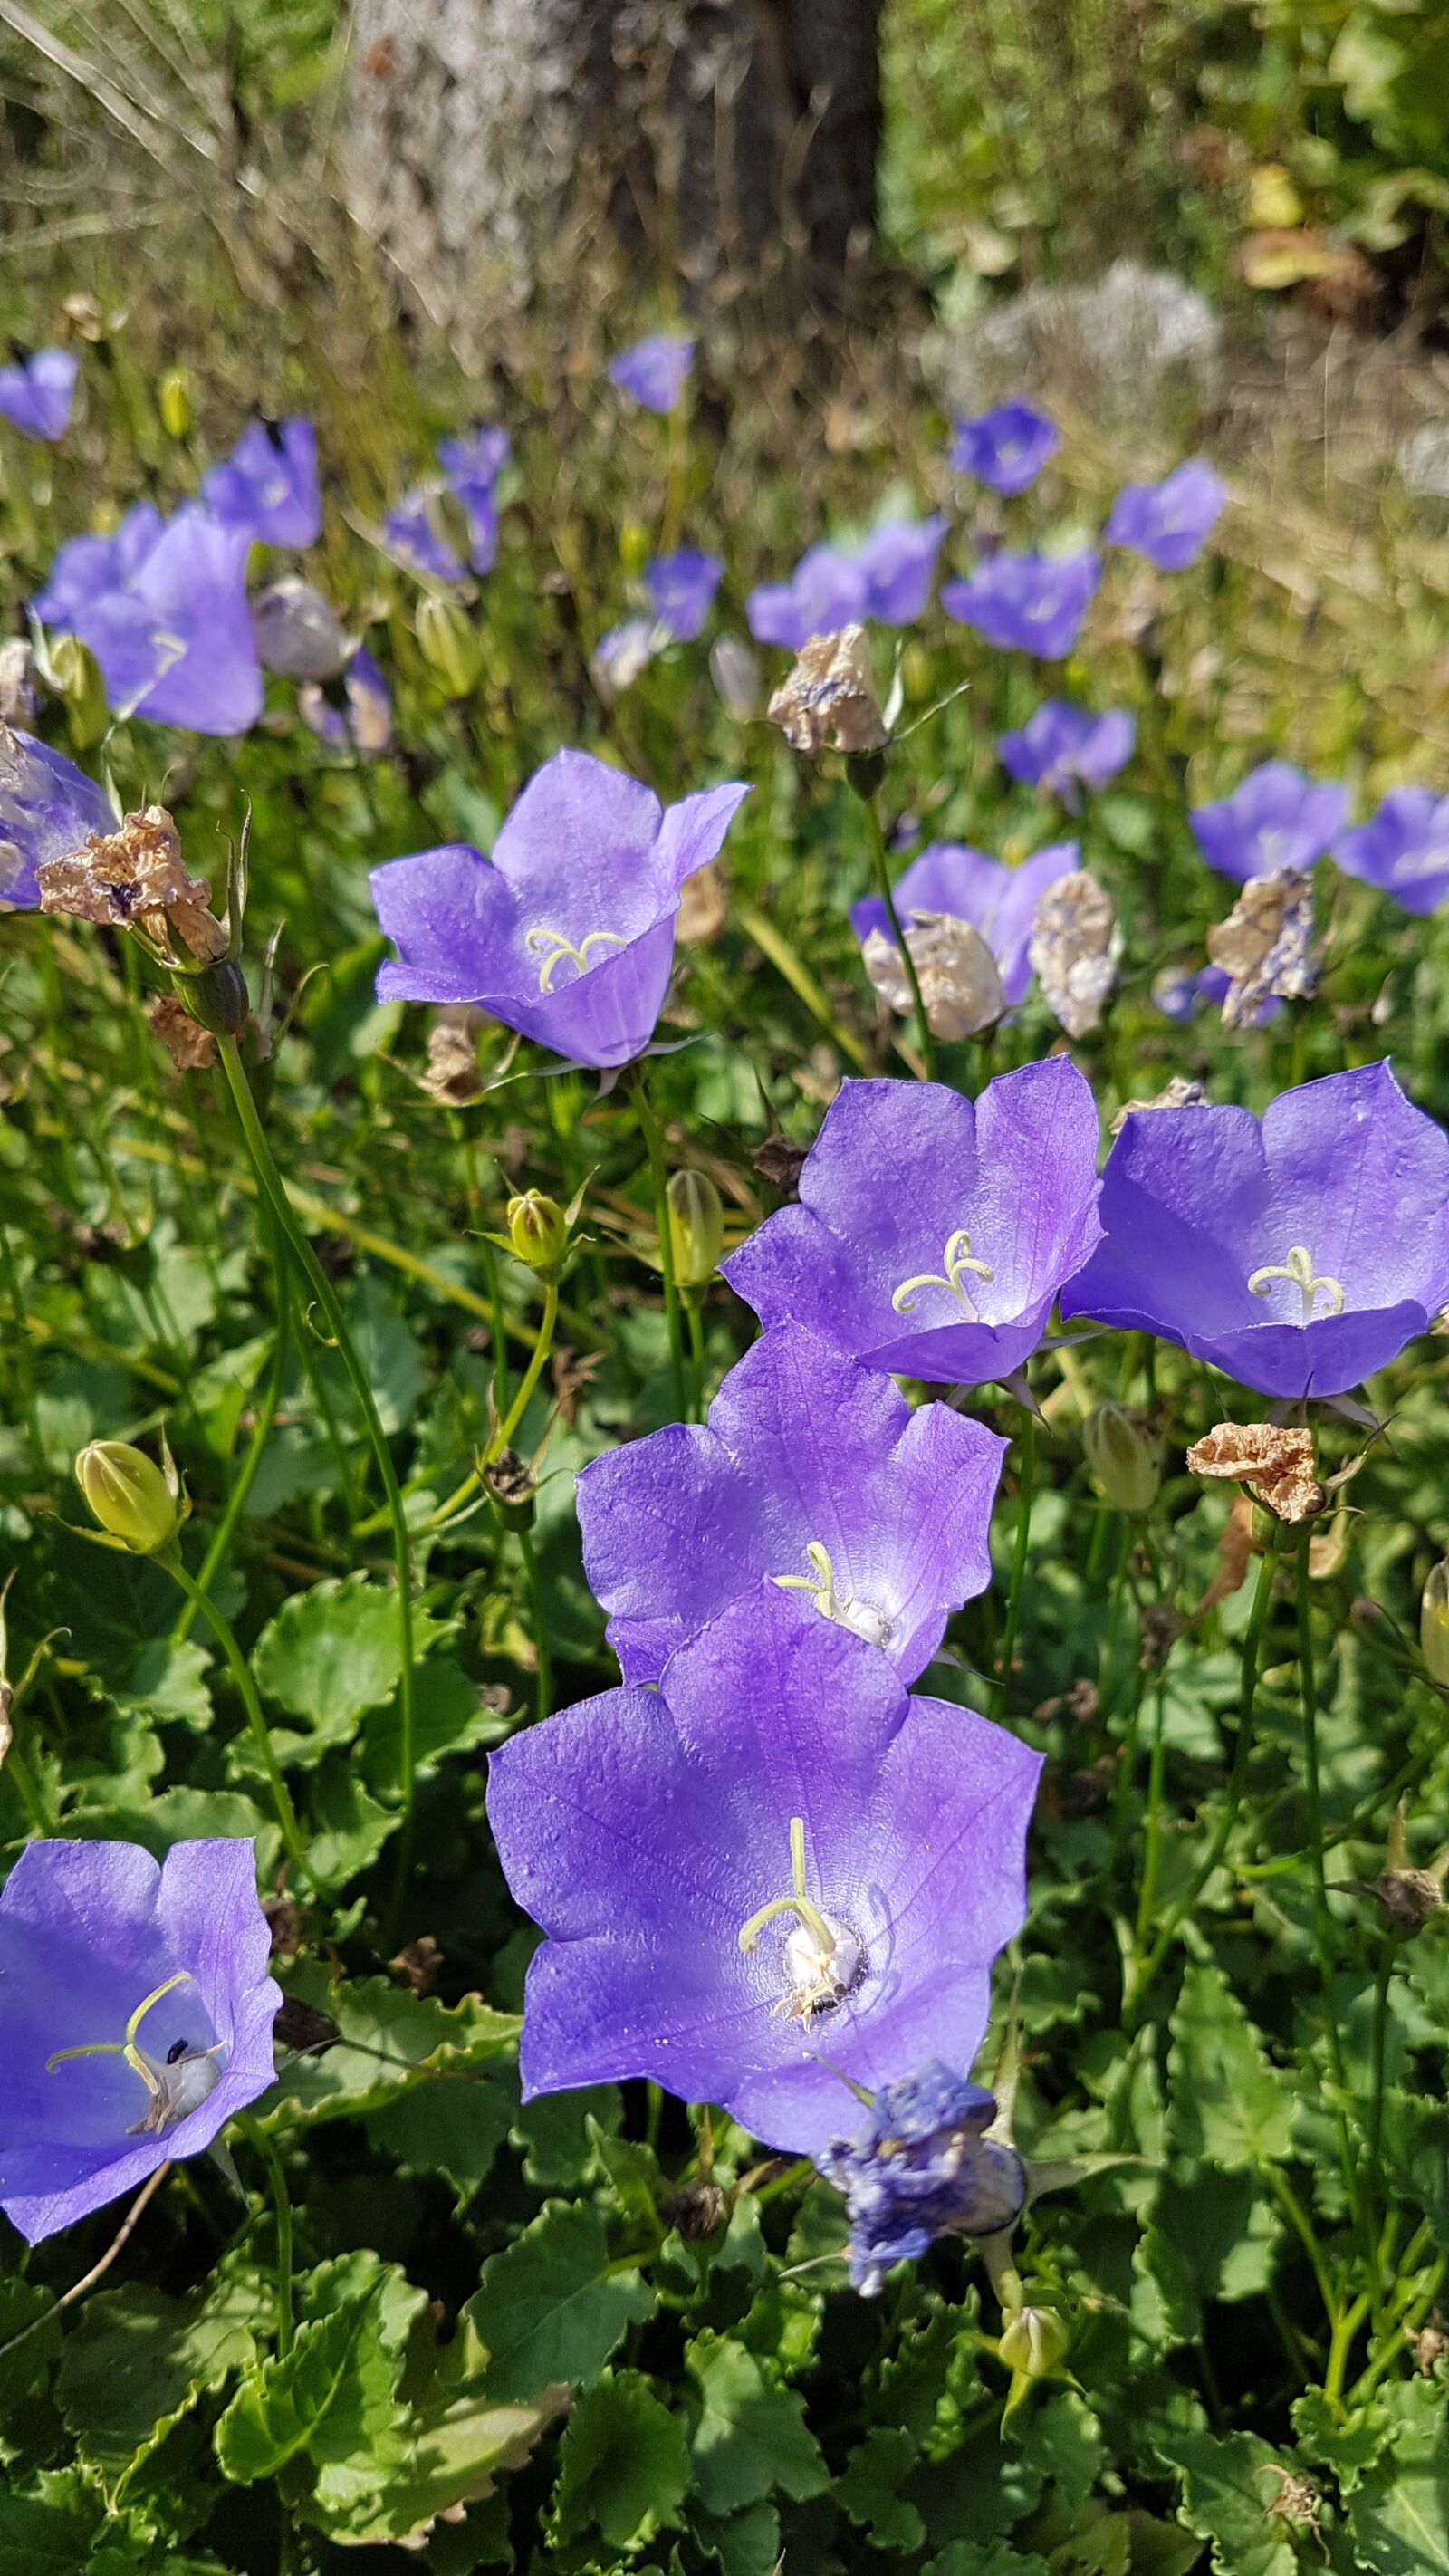 Samsung Galaxy S7 sample photo. Flowers, violet, nature photography